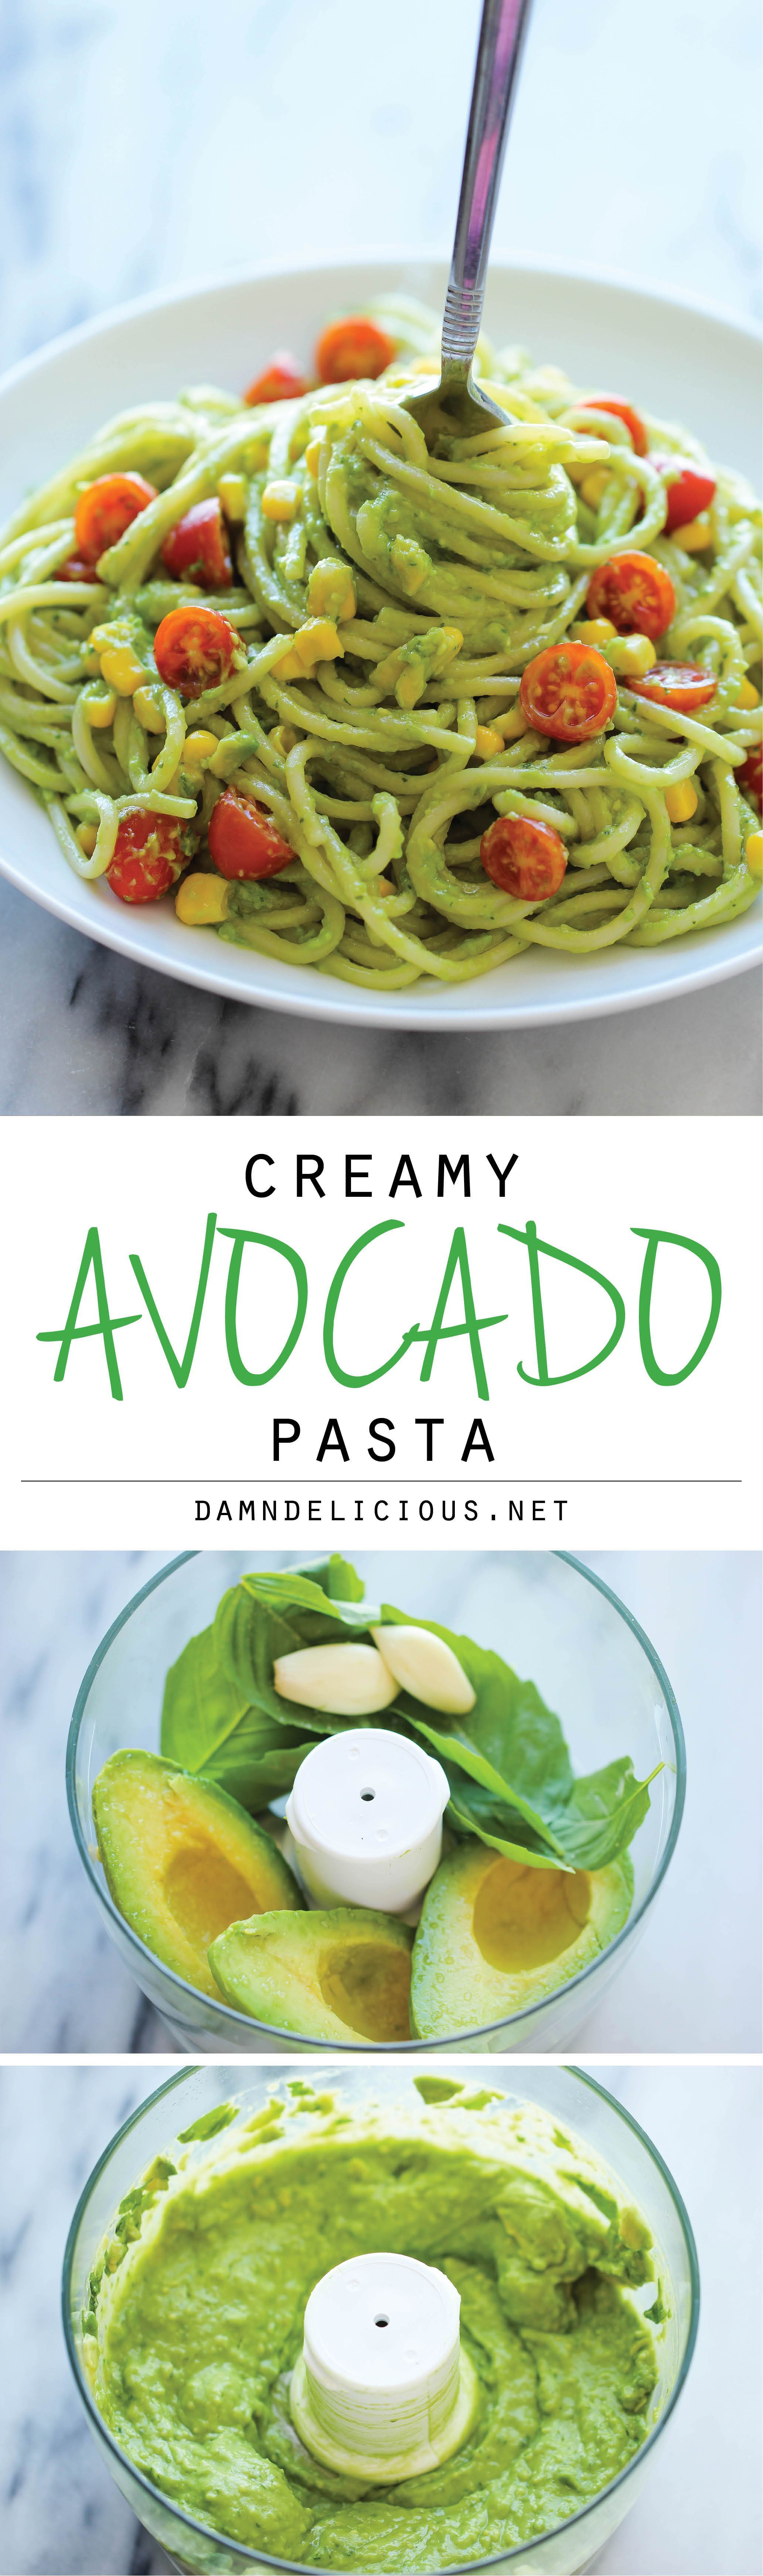 Avocado Pasta – The easiest, most unbelievably creamy avocado pasta. And itll be on your dinner table in just 20 min!